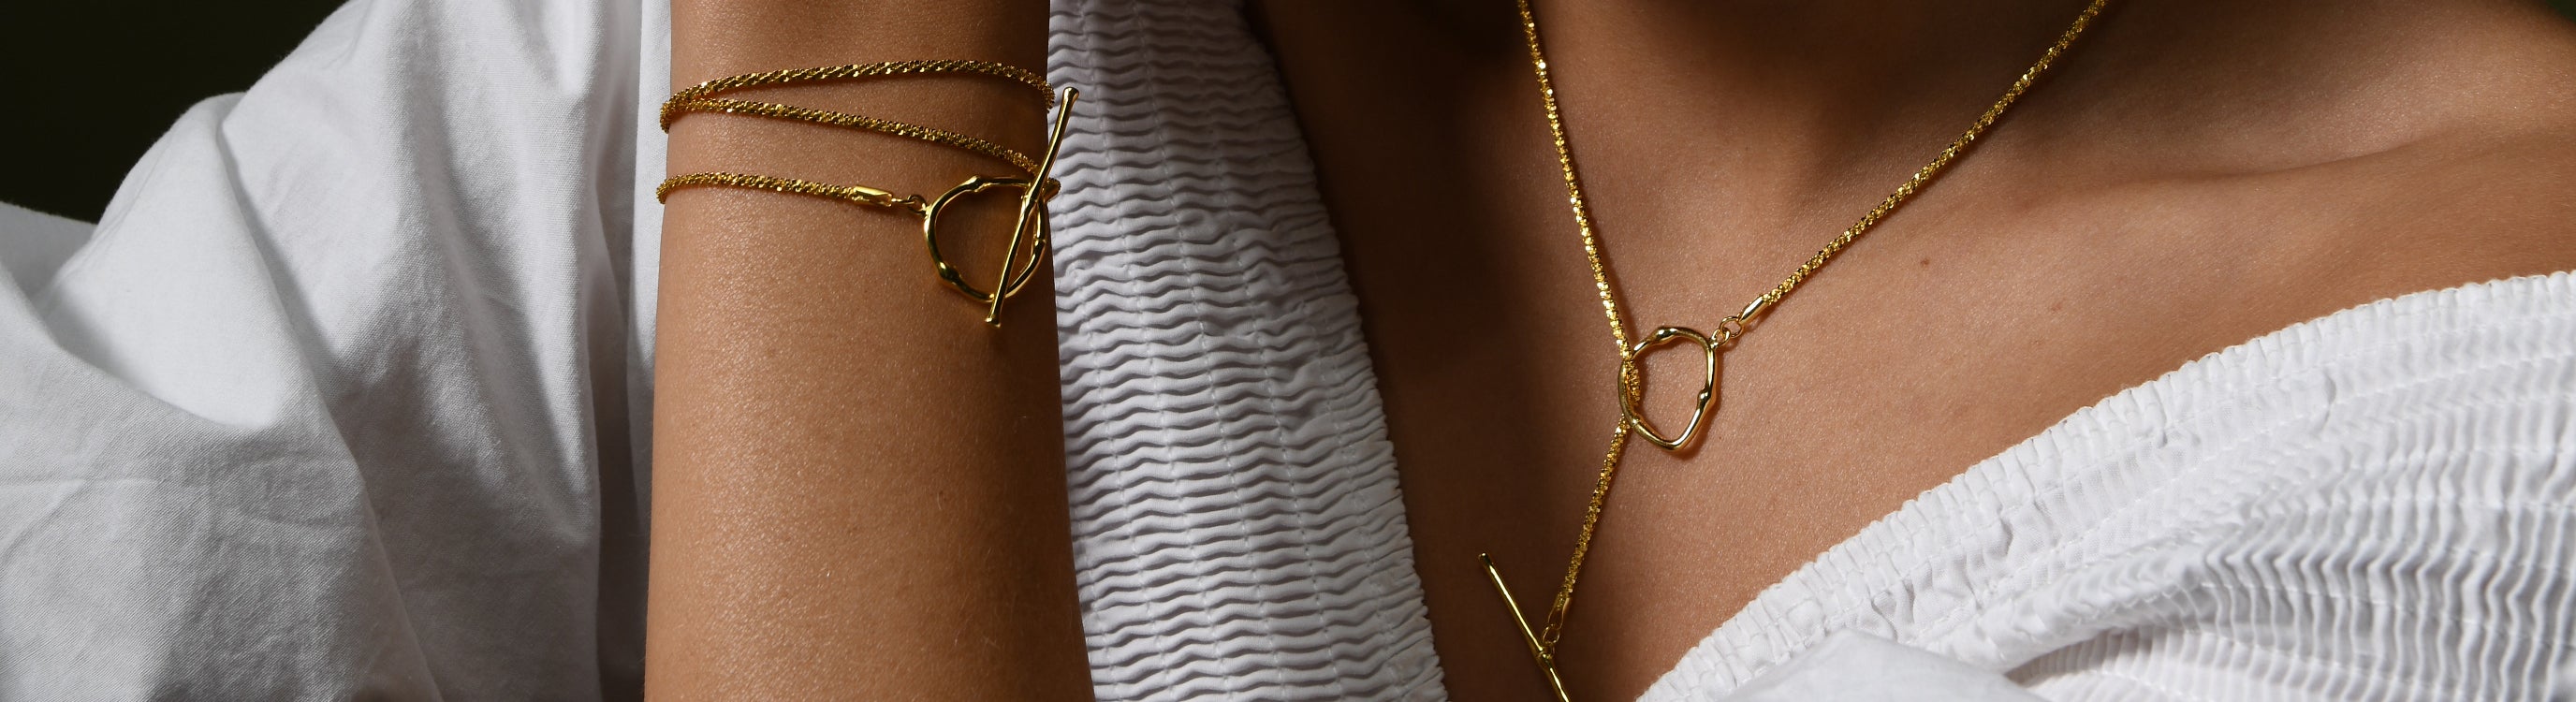 A female model wears a gold vermeil necklace with a dainty chain and toggle clasp. The model also wears a bracelet with a dainty chain and toggle clasp.